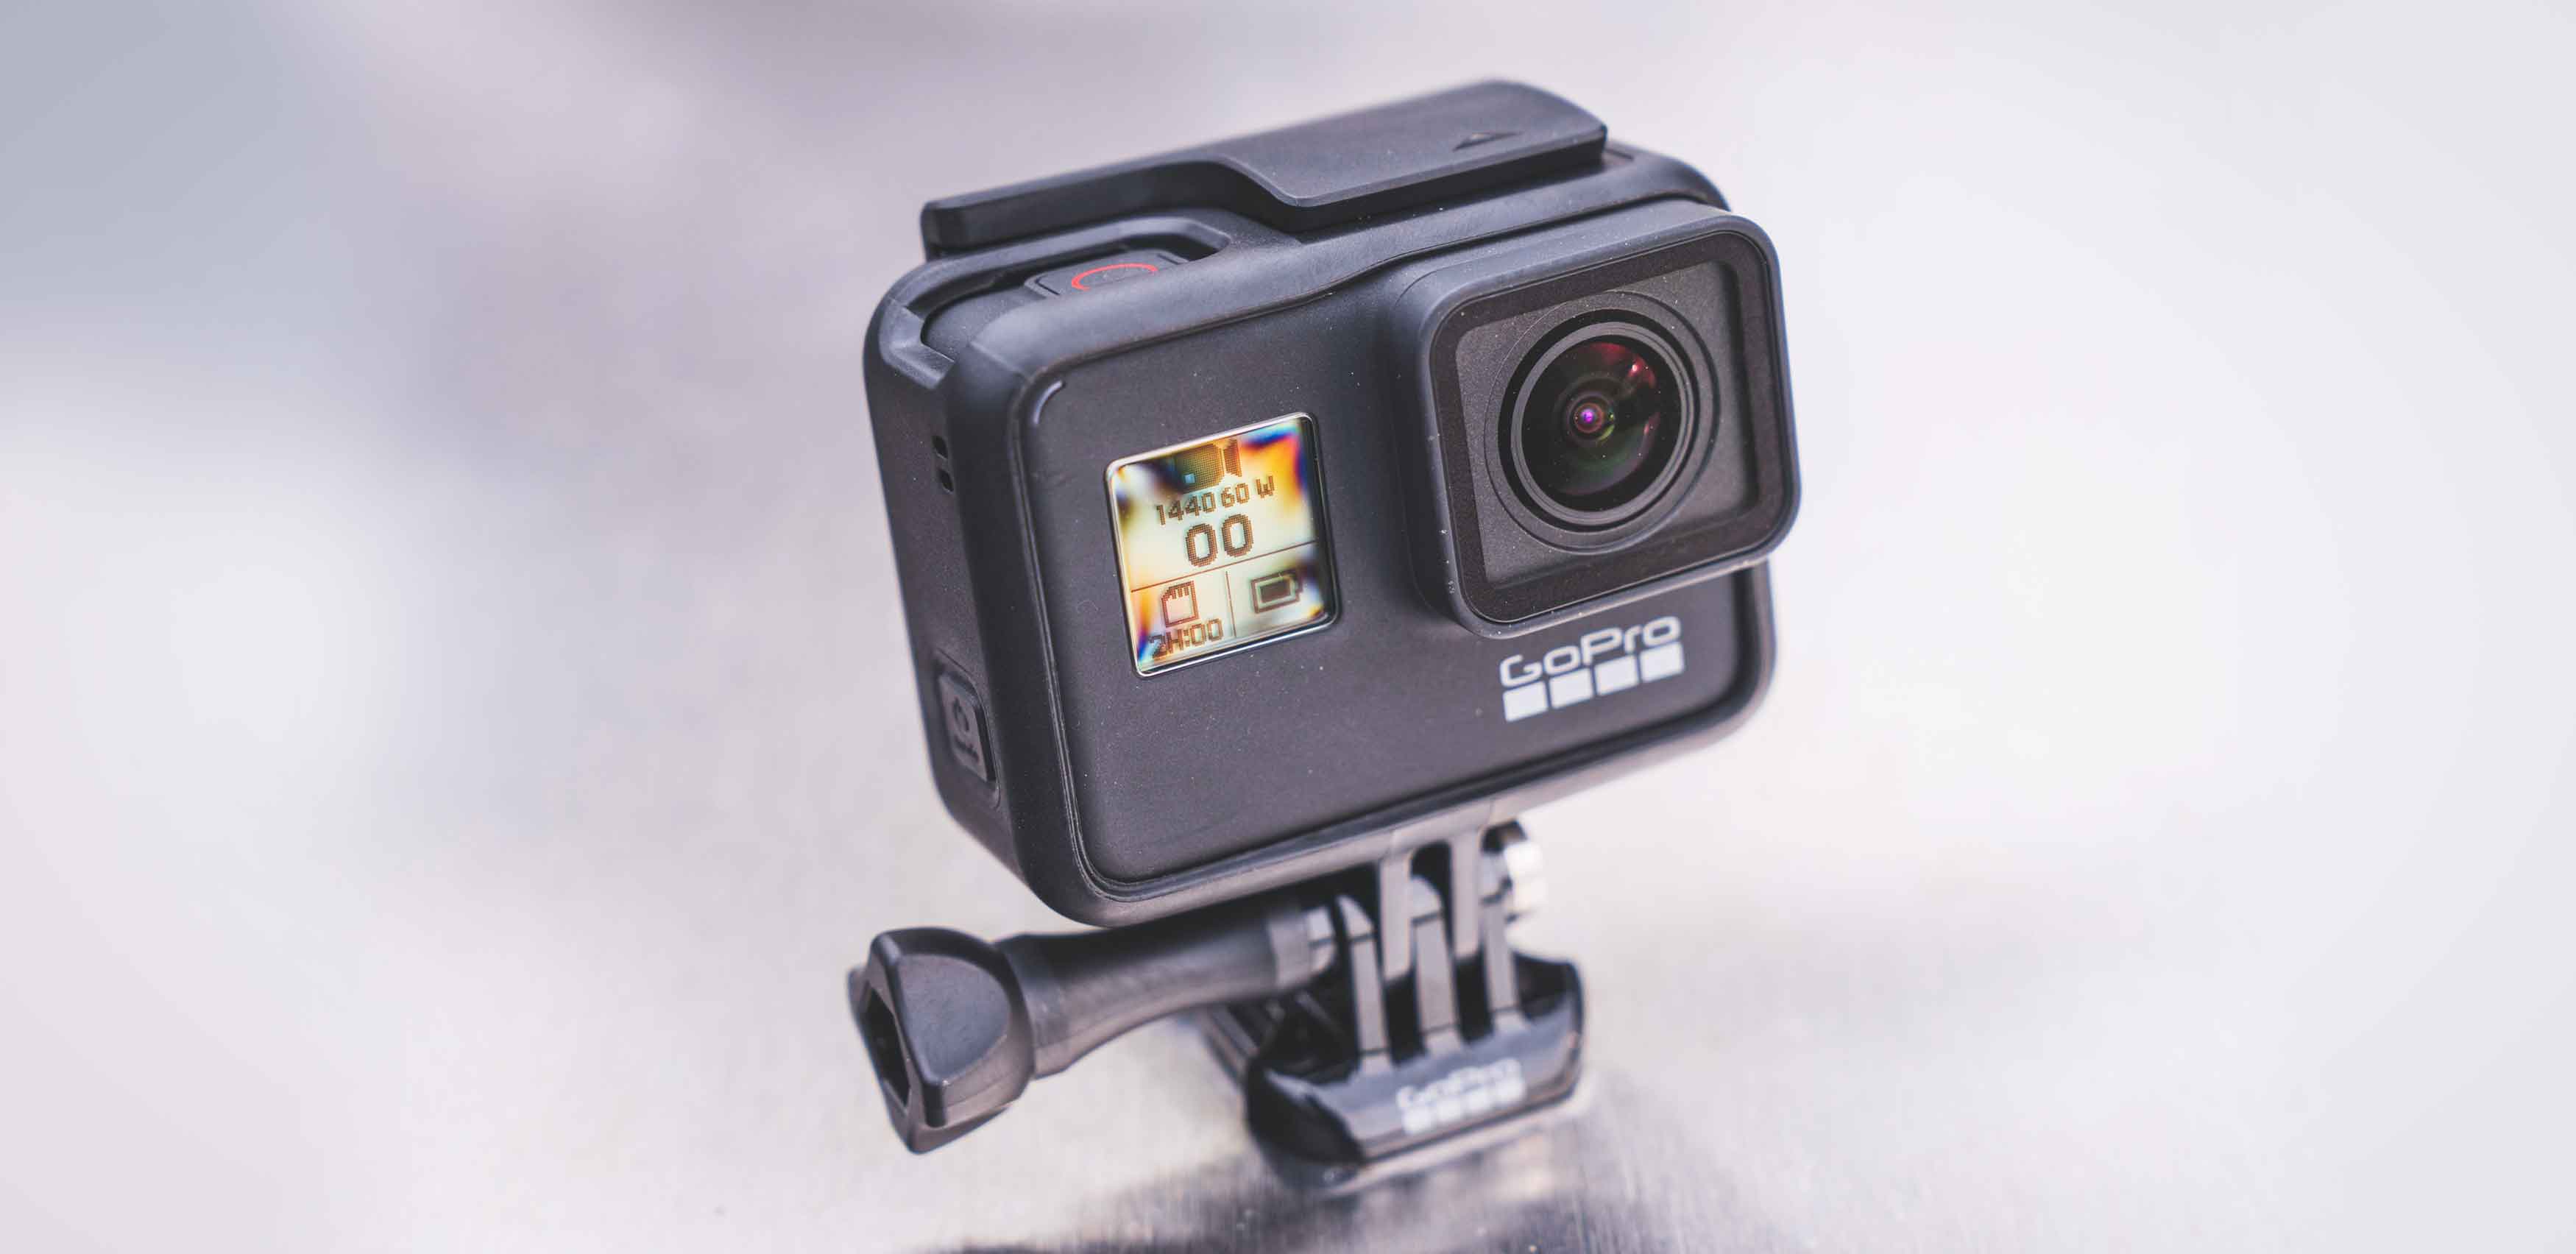 Review: GoPro Hero7 Black. The Best Action Camera Ever?